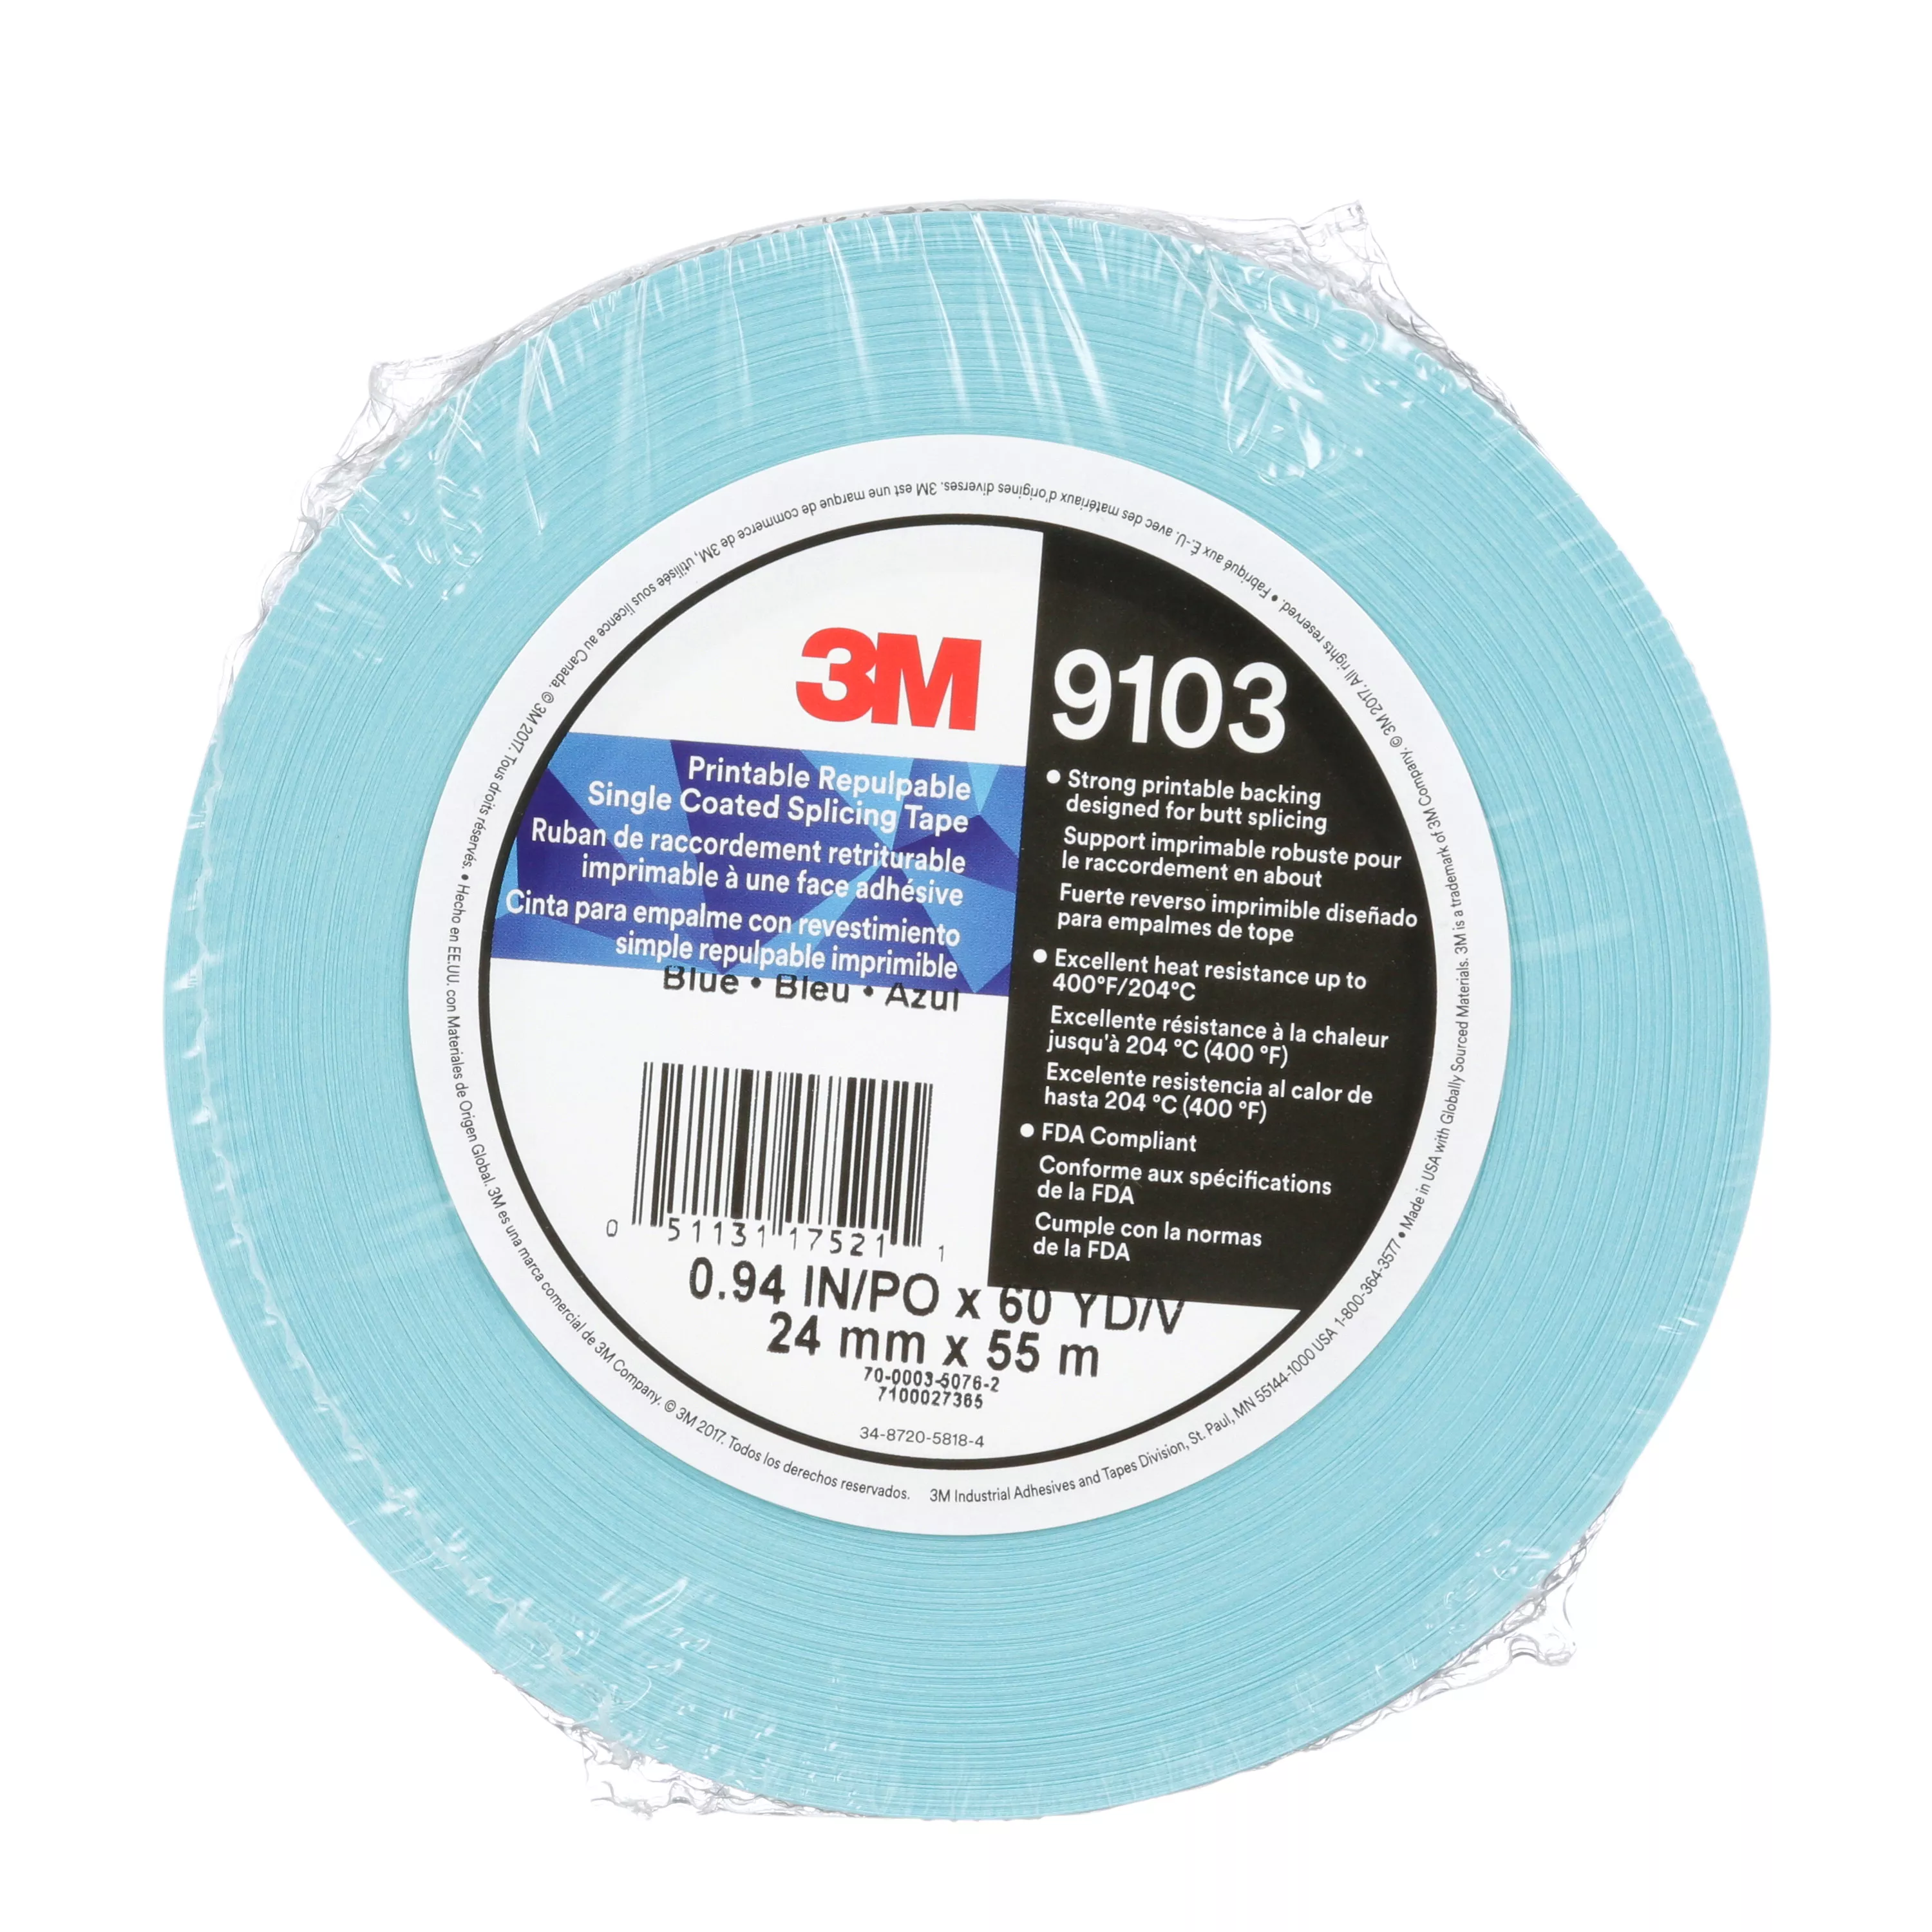 3M™ Printable Repulpable Single Coated Splicing Tape 9103, Blue, 24 mm x
55 m, 4.1 mil, 36 Roll/Case